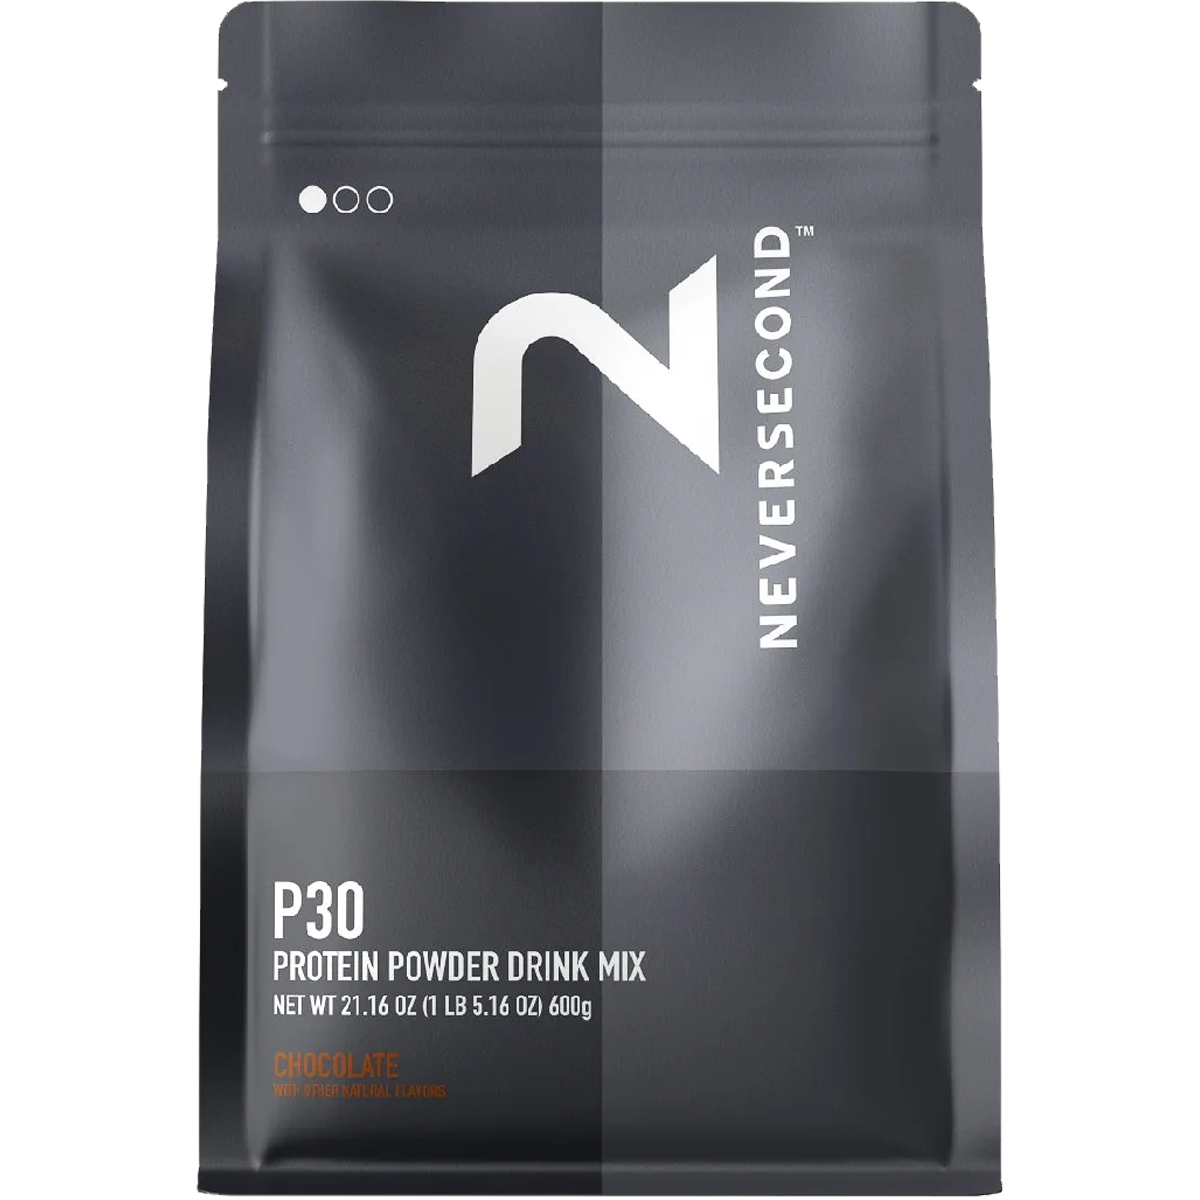 P30 Recovery Drink (20 Servings) alternate view